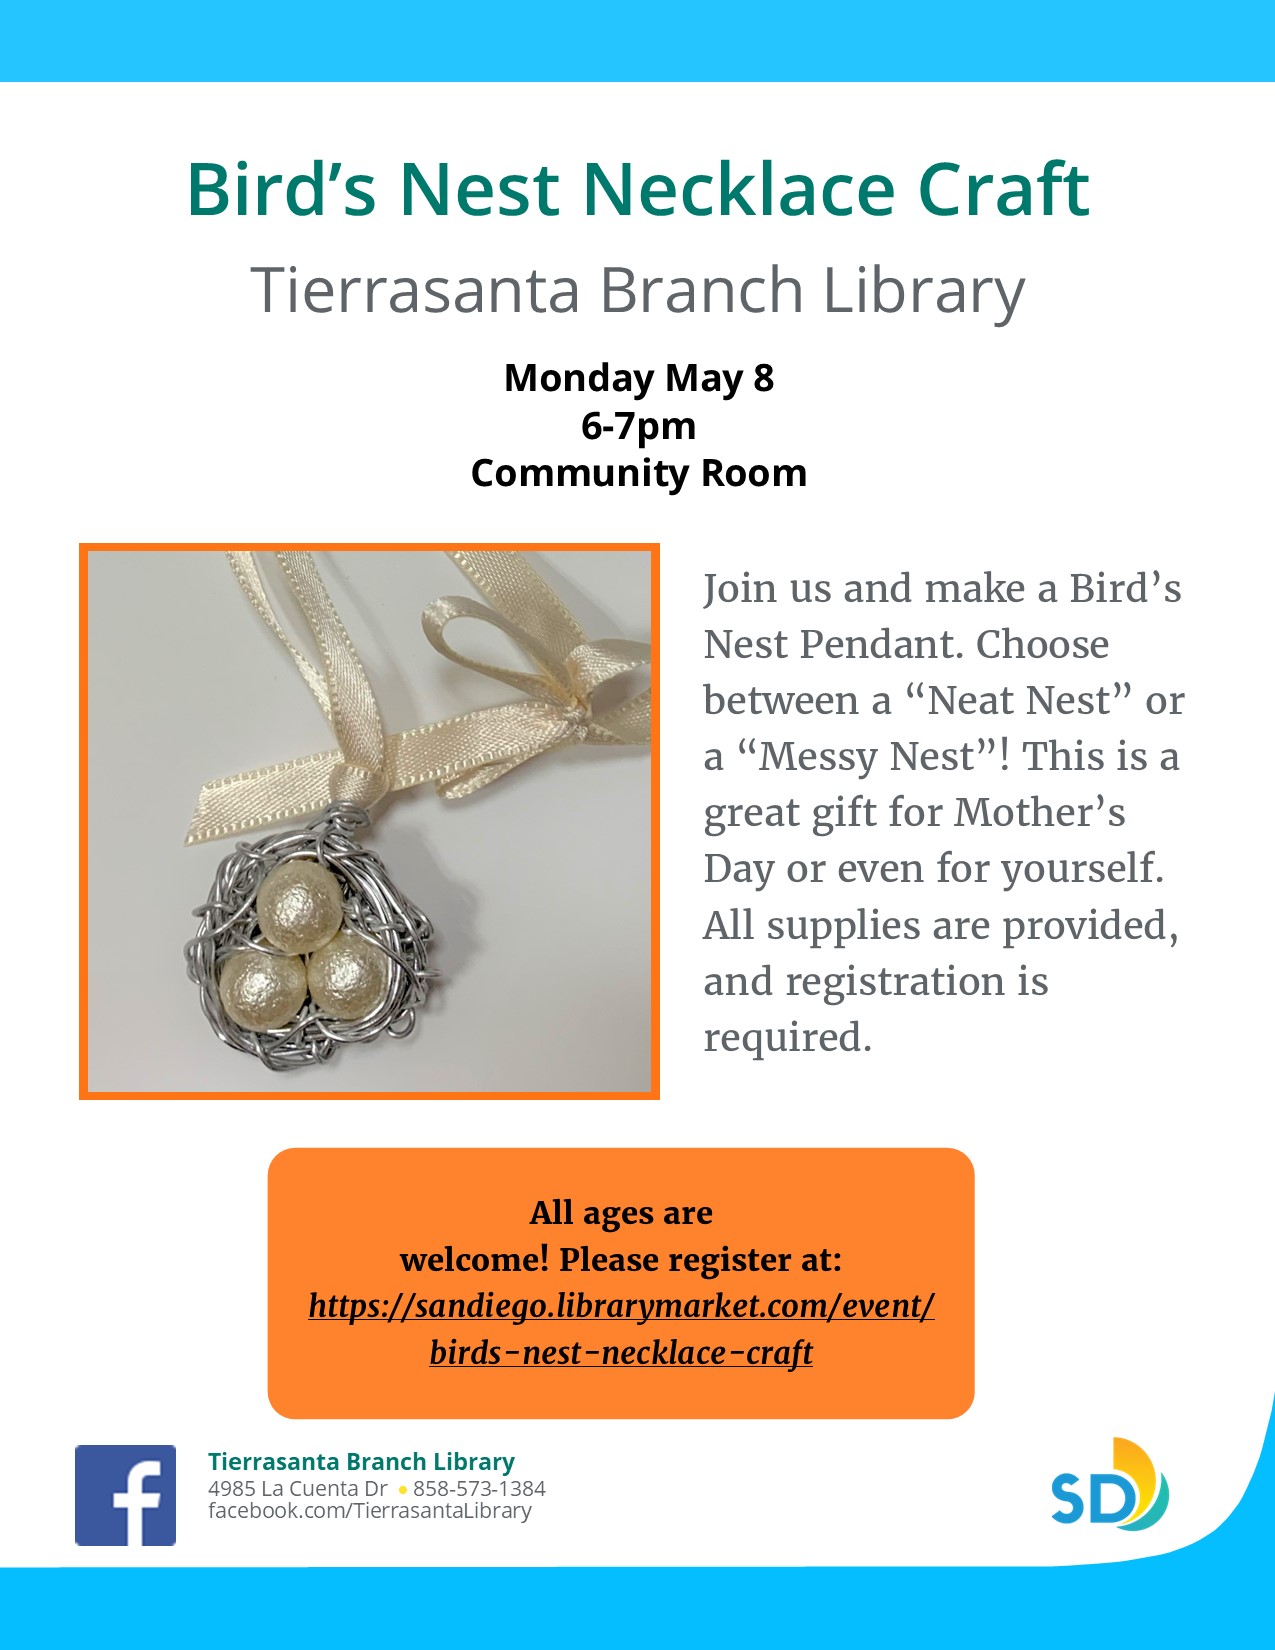 Flyer with image of a necklace with a bird's nest pendant